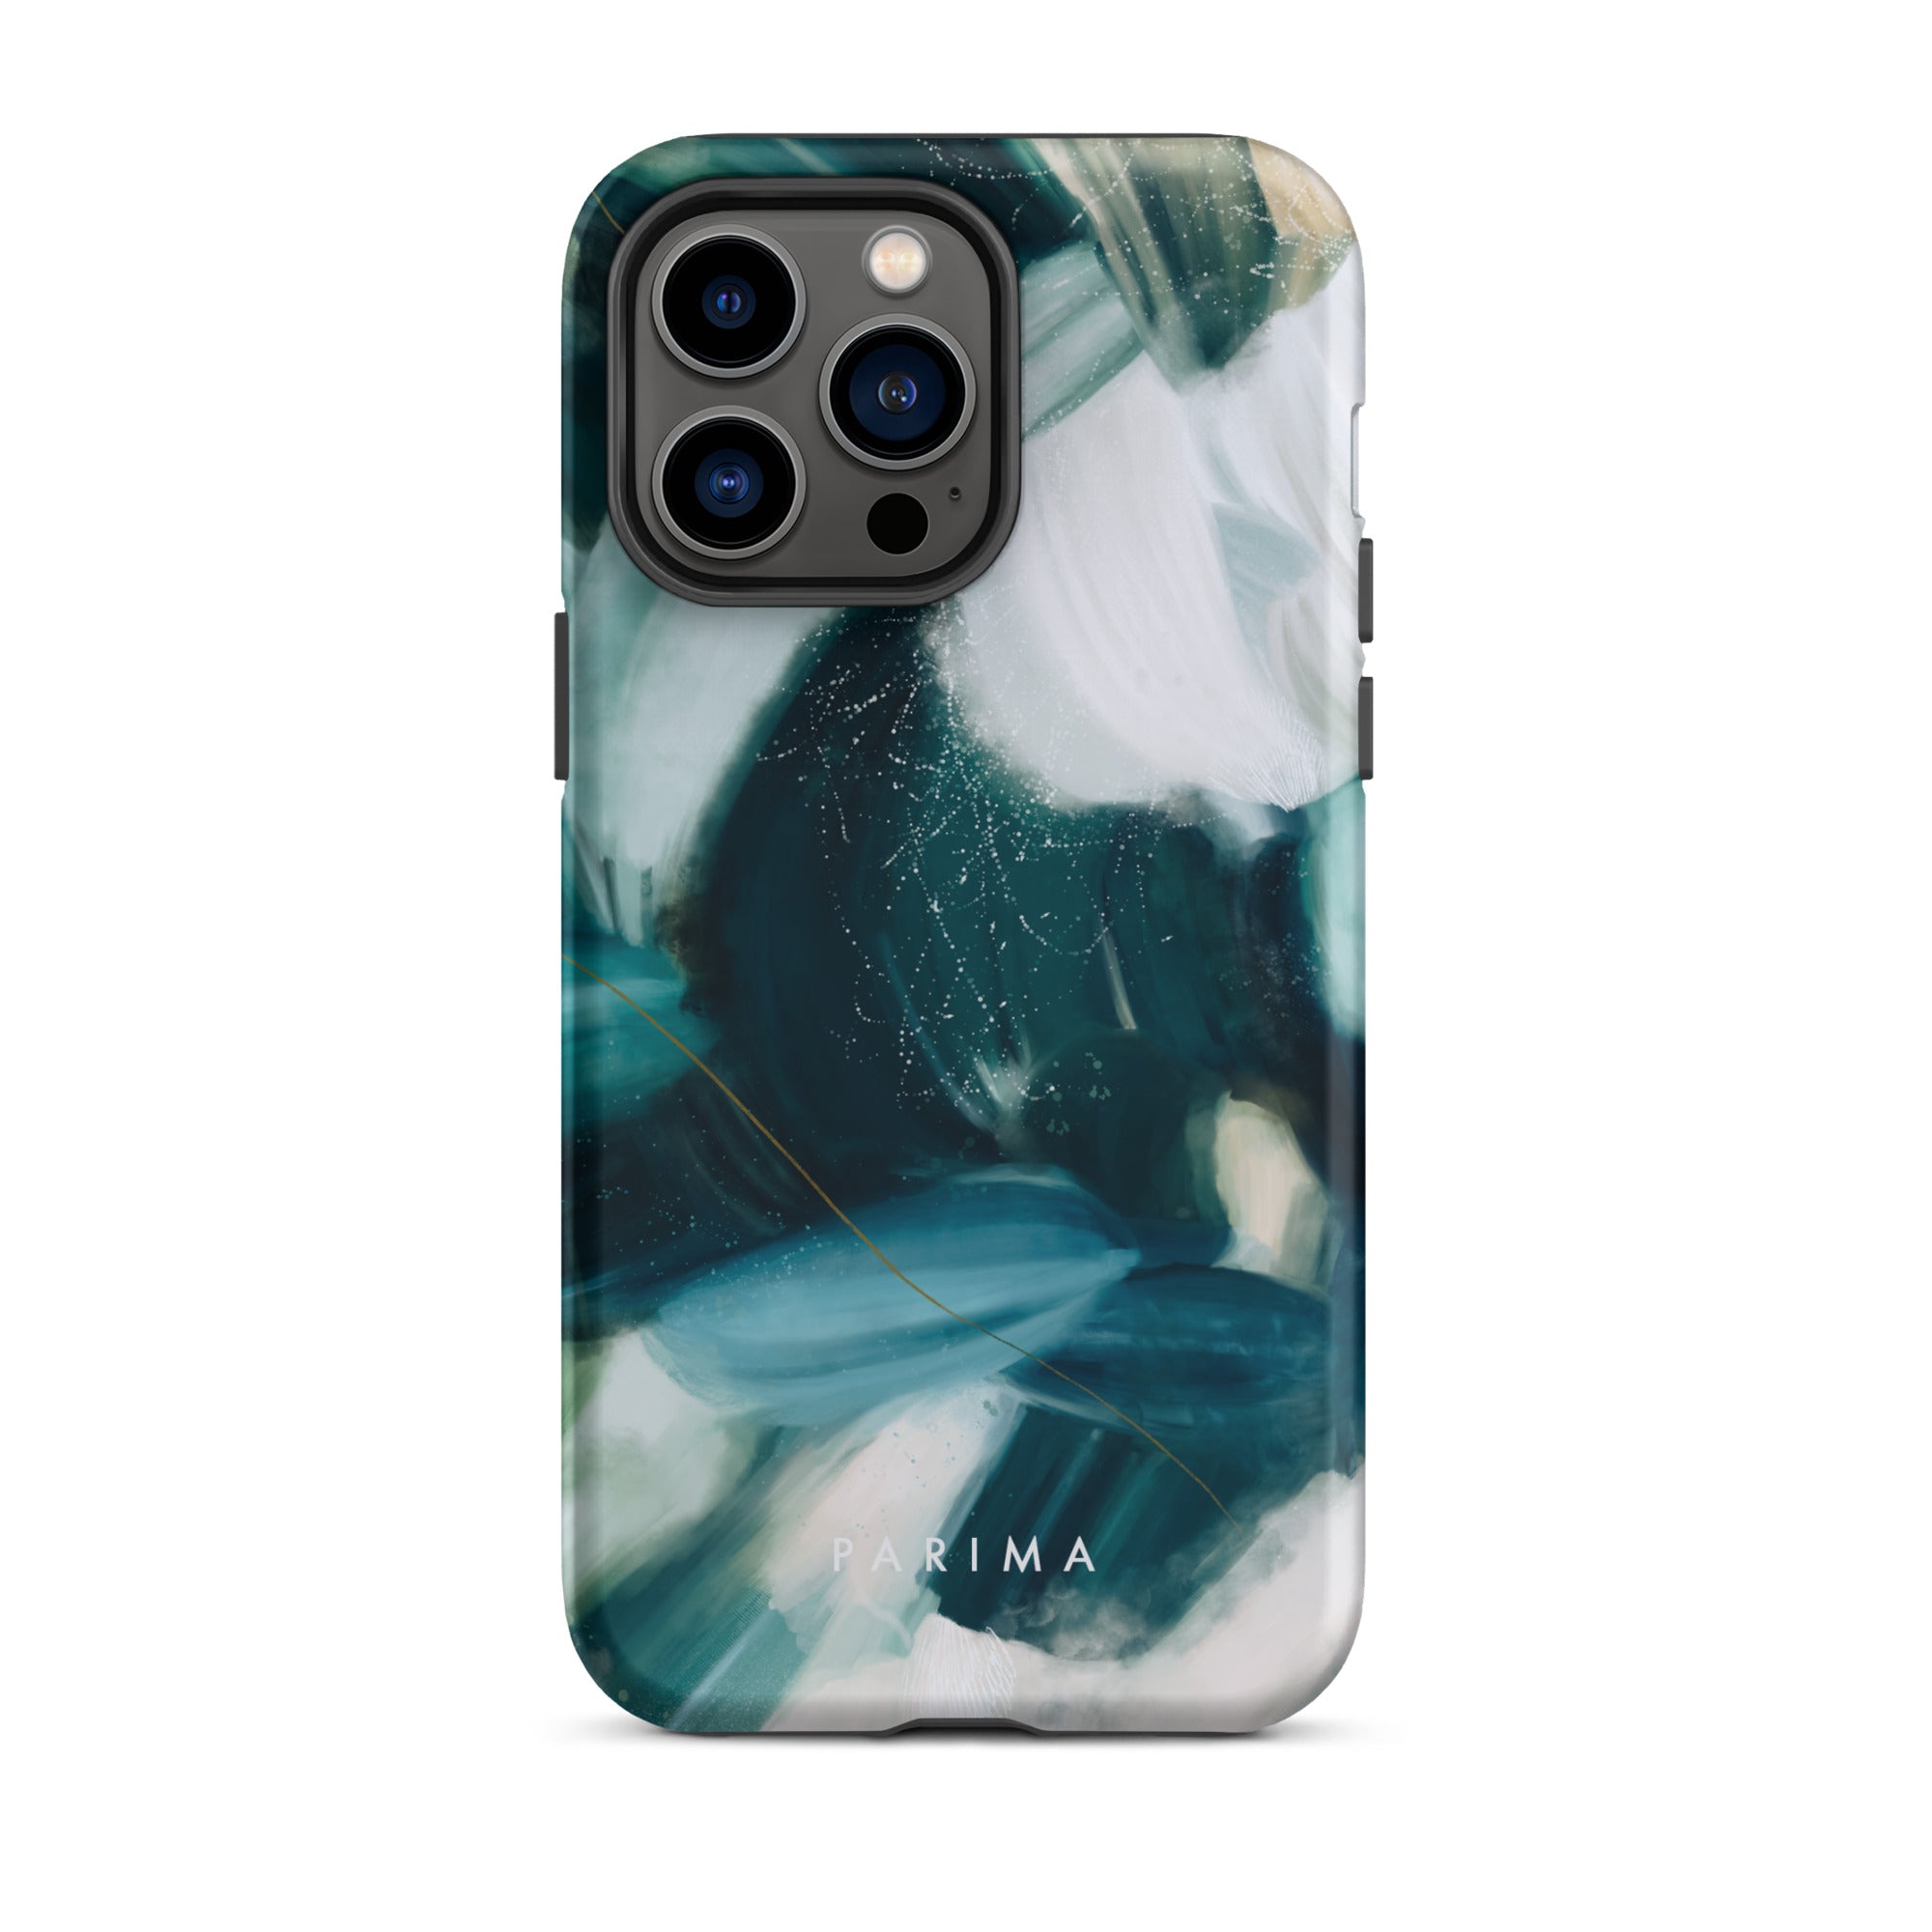 Caspian, green and blue abstract art - iPhone 14 Pro Max tough case by Parima Studio